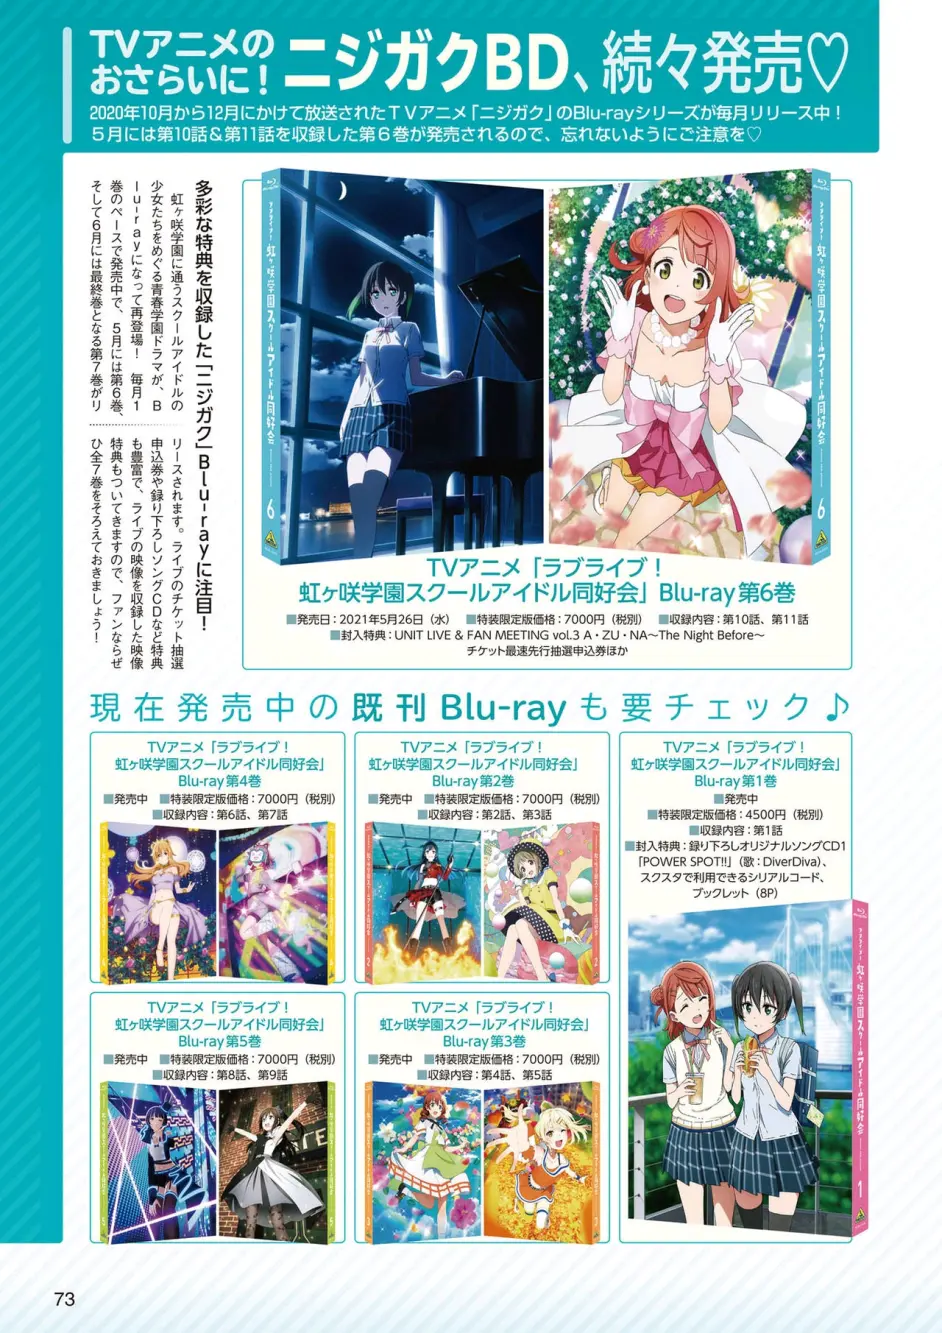 LoveLive!Days 虹ヶ咲SPECIAL 2021 Spring LoveLive!Days SPECIAL - 哔 